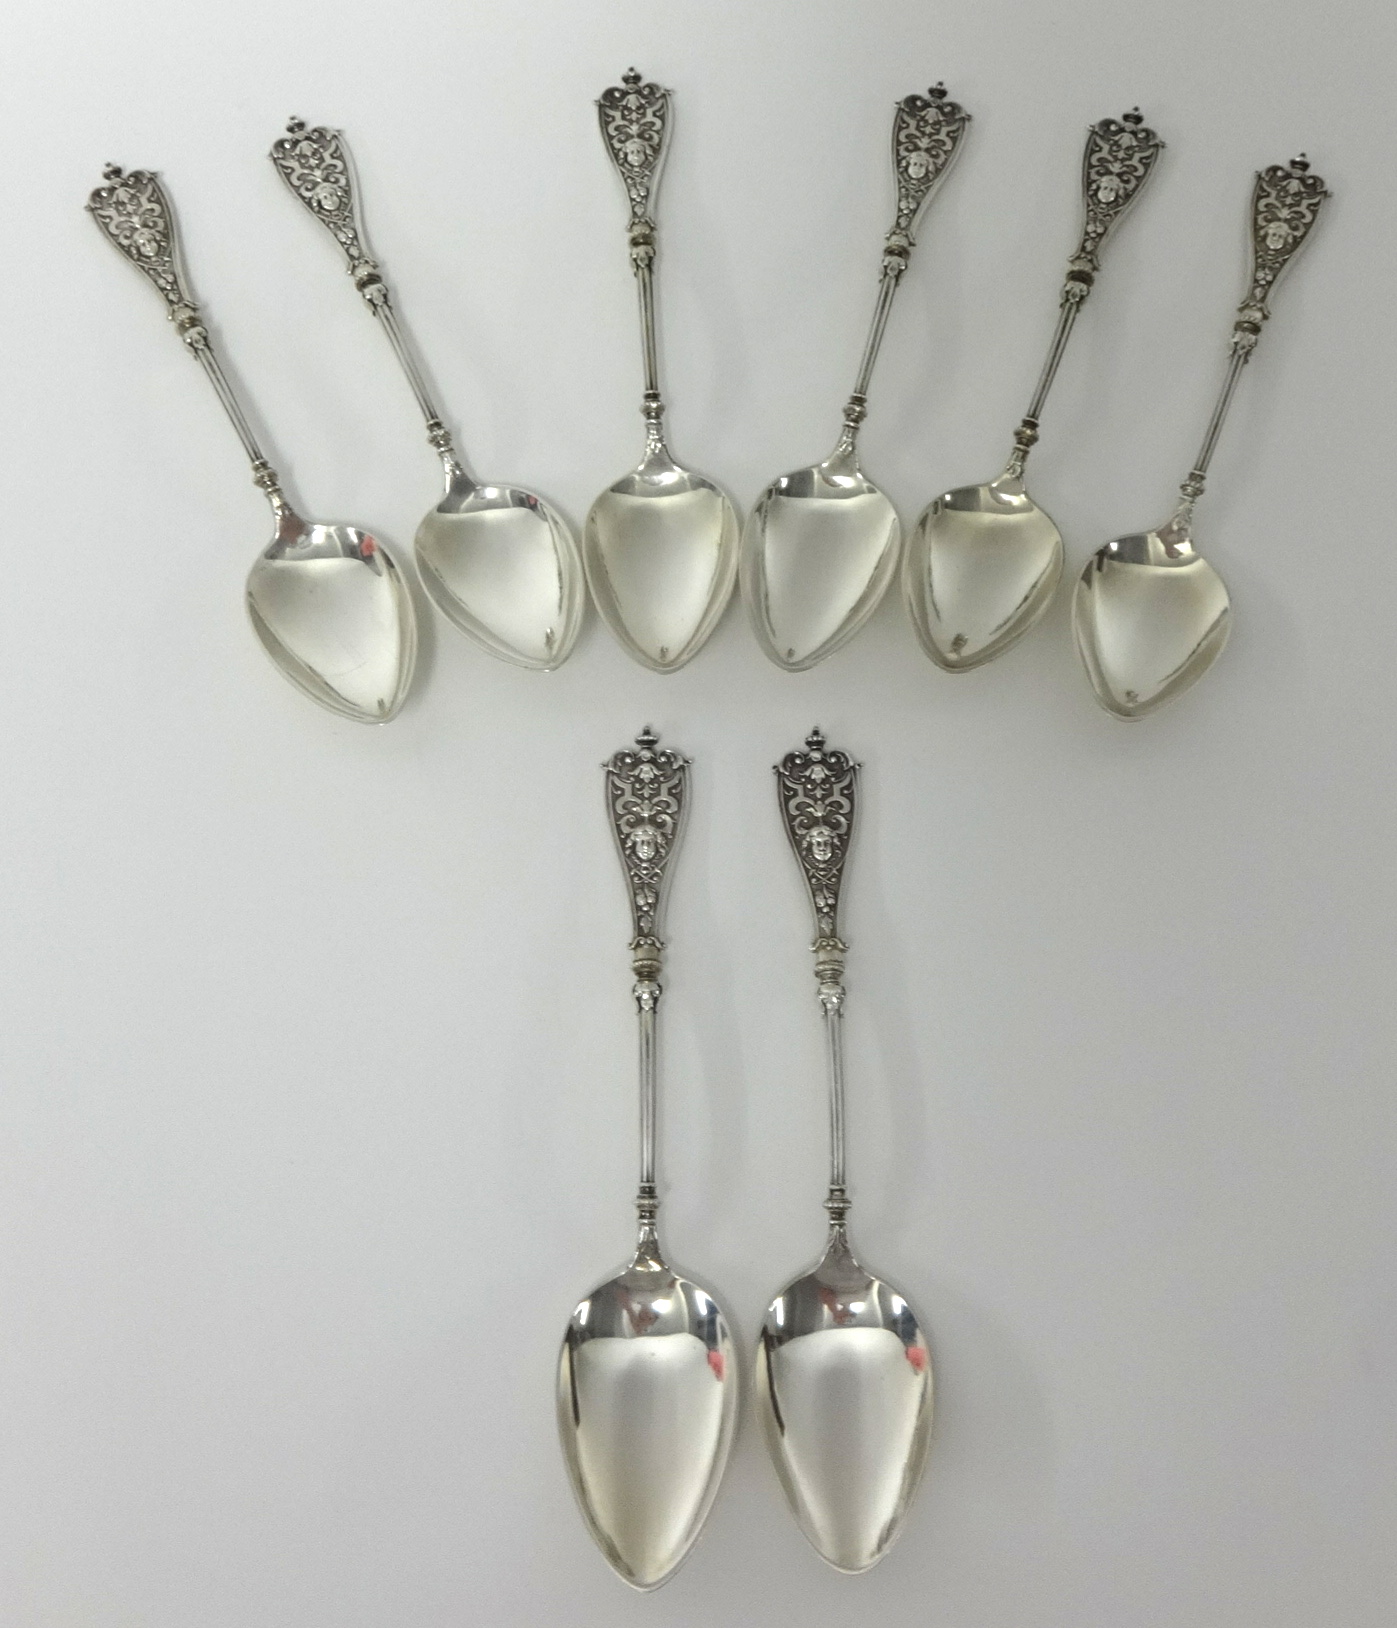 A fine sixteen piece French silver set of dessert eaters stamped 800, approximately 25 oz